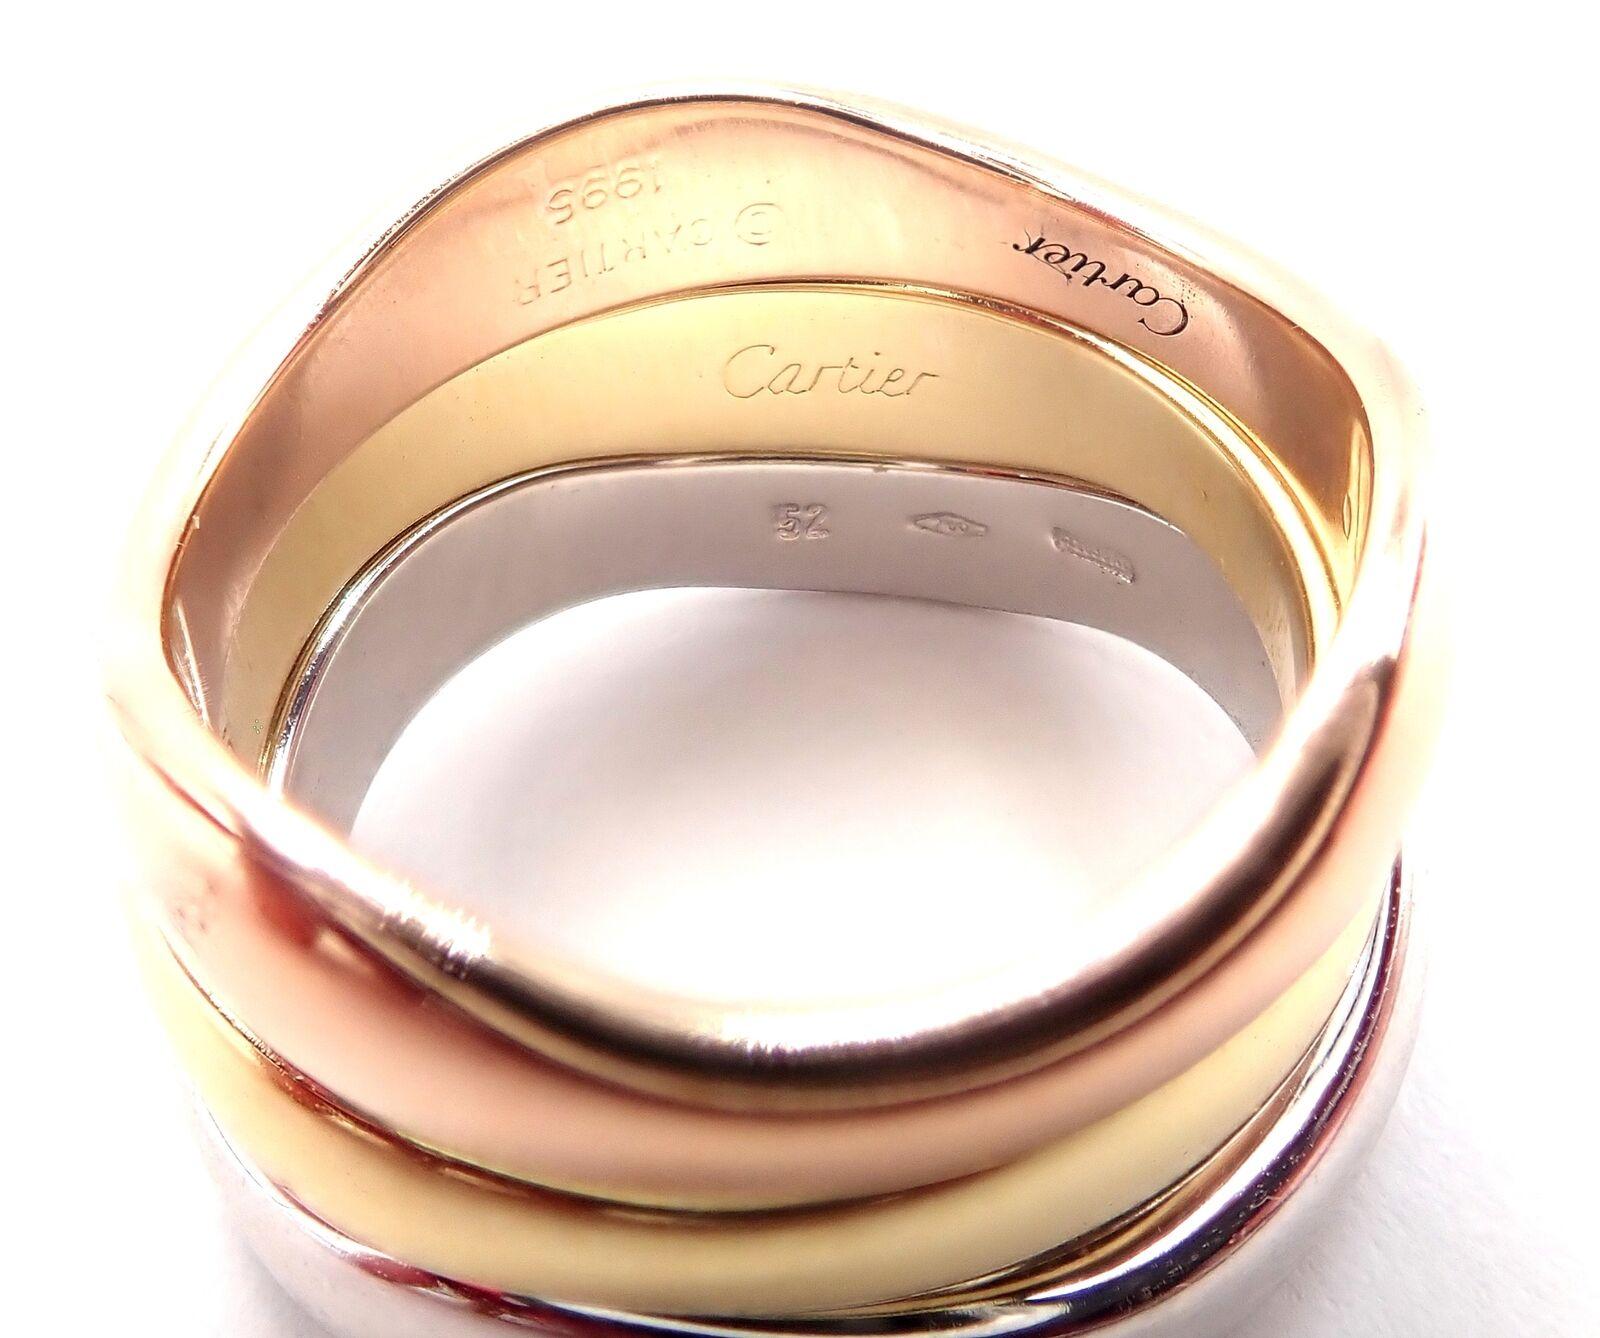 Cartier Three Stocking Tri-Color Gold Bands Ring For Sale 5